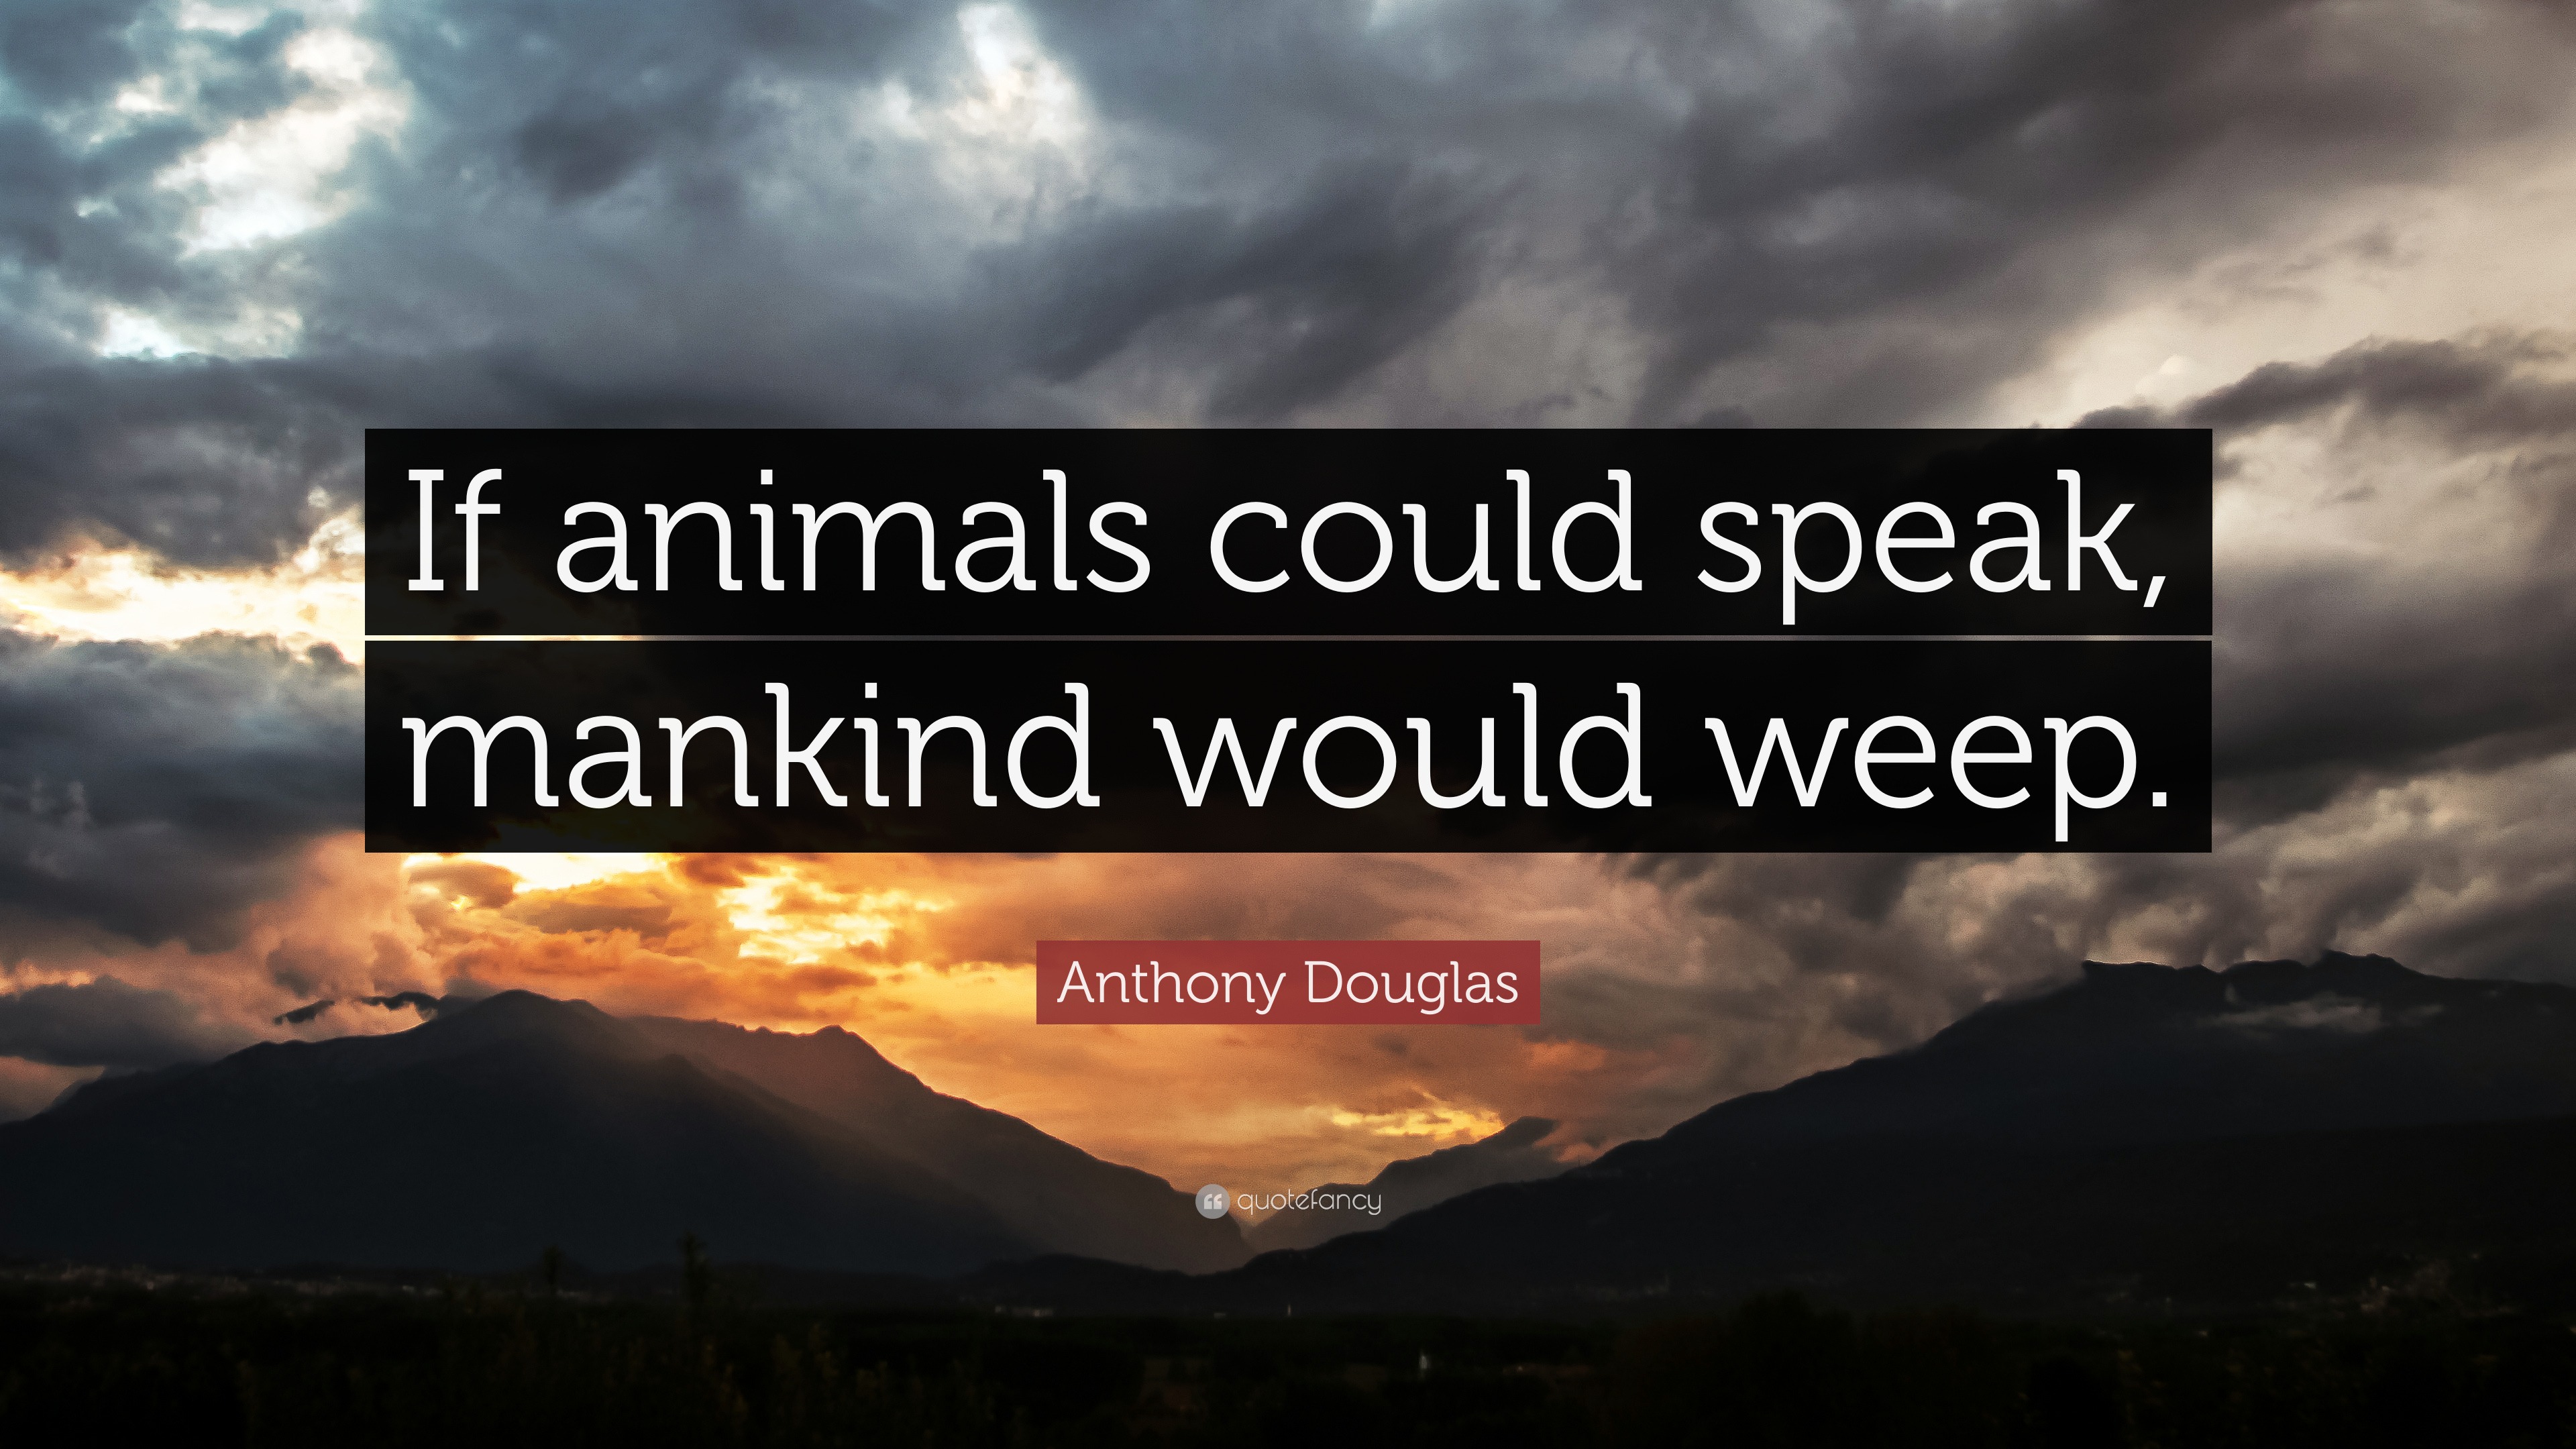 Anthony Douglas Quote: “If animals could speak, mankind would weep.”